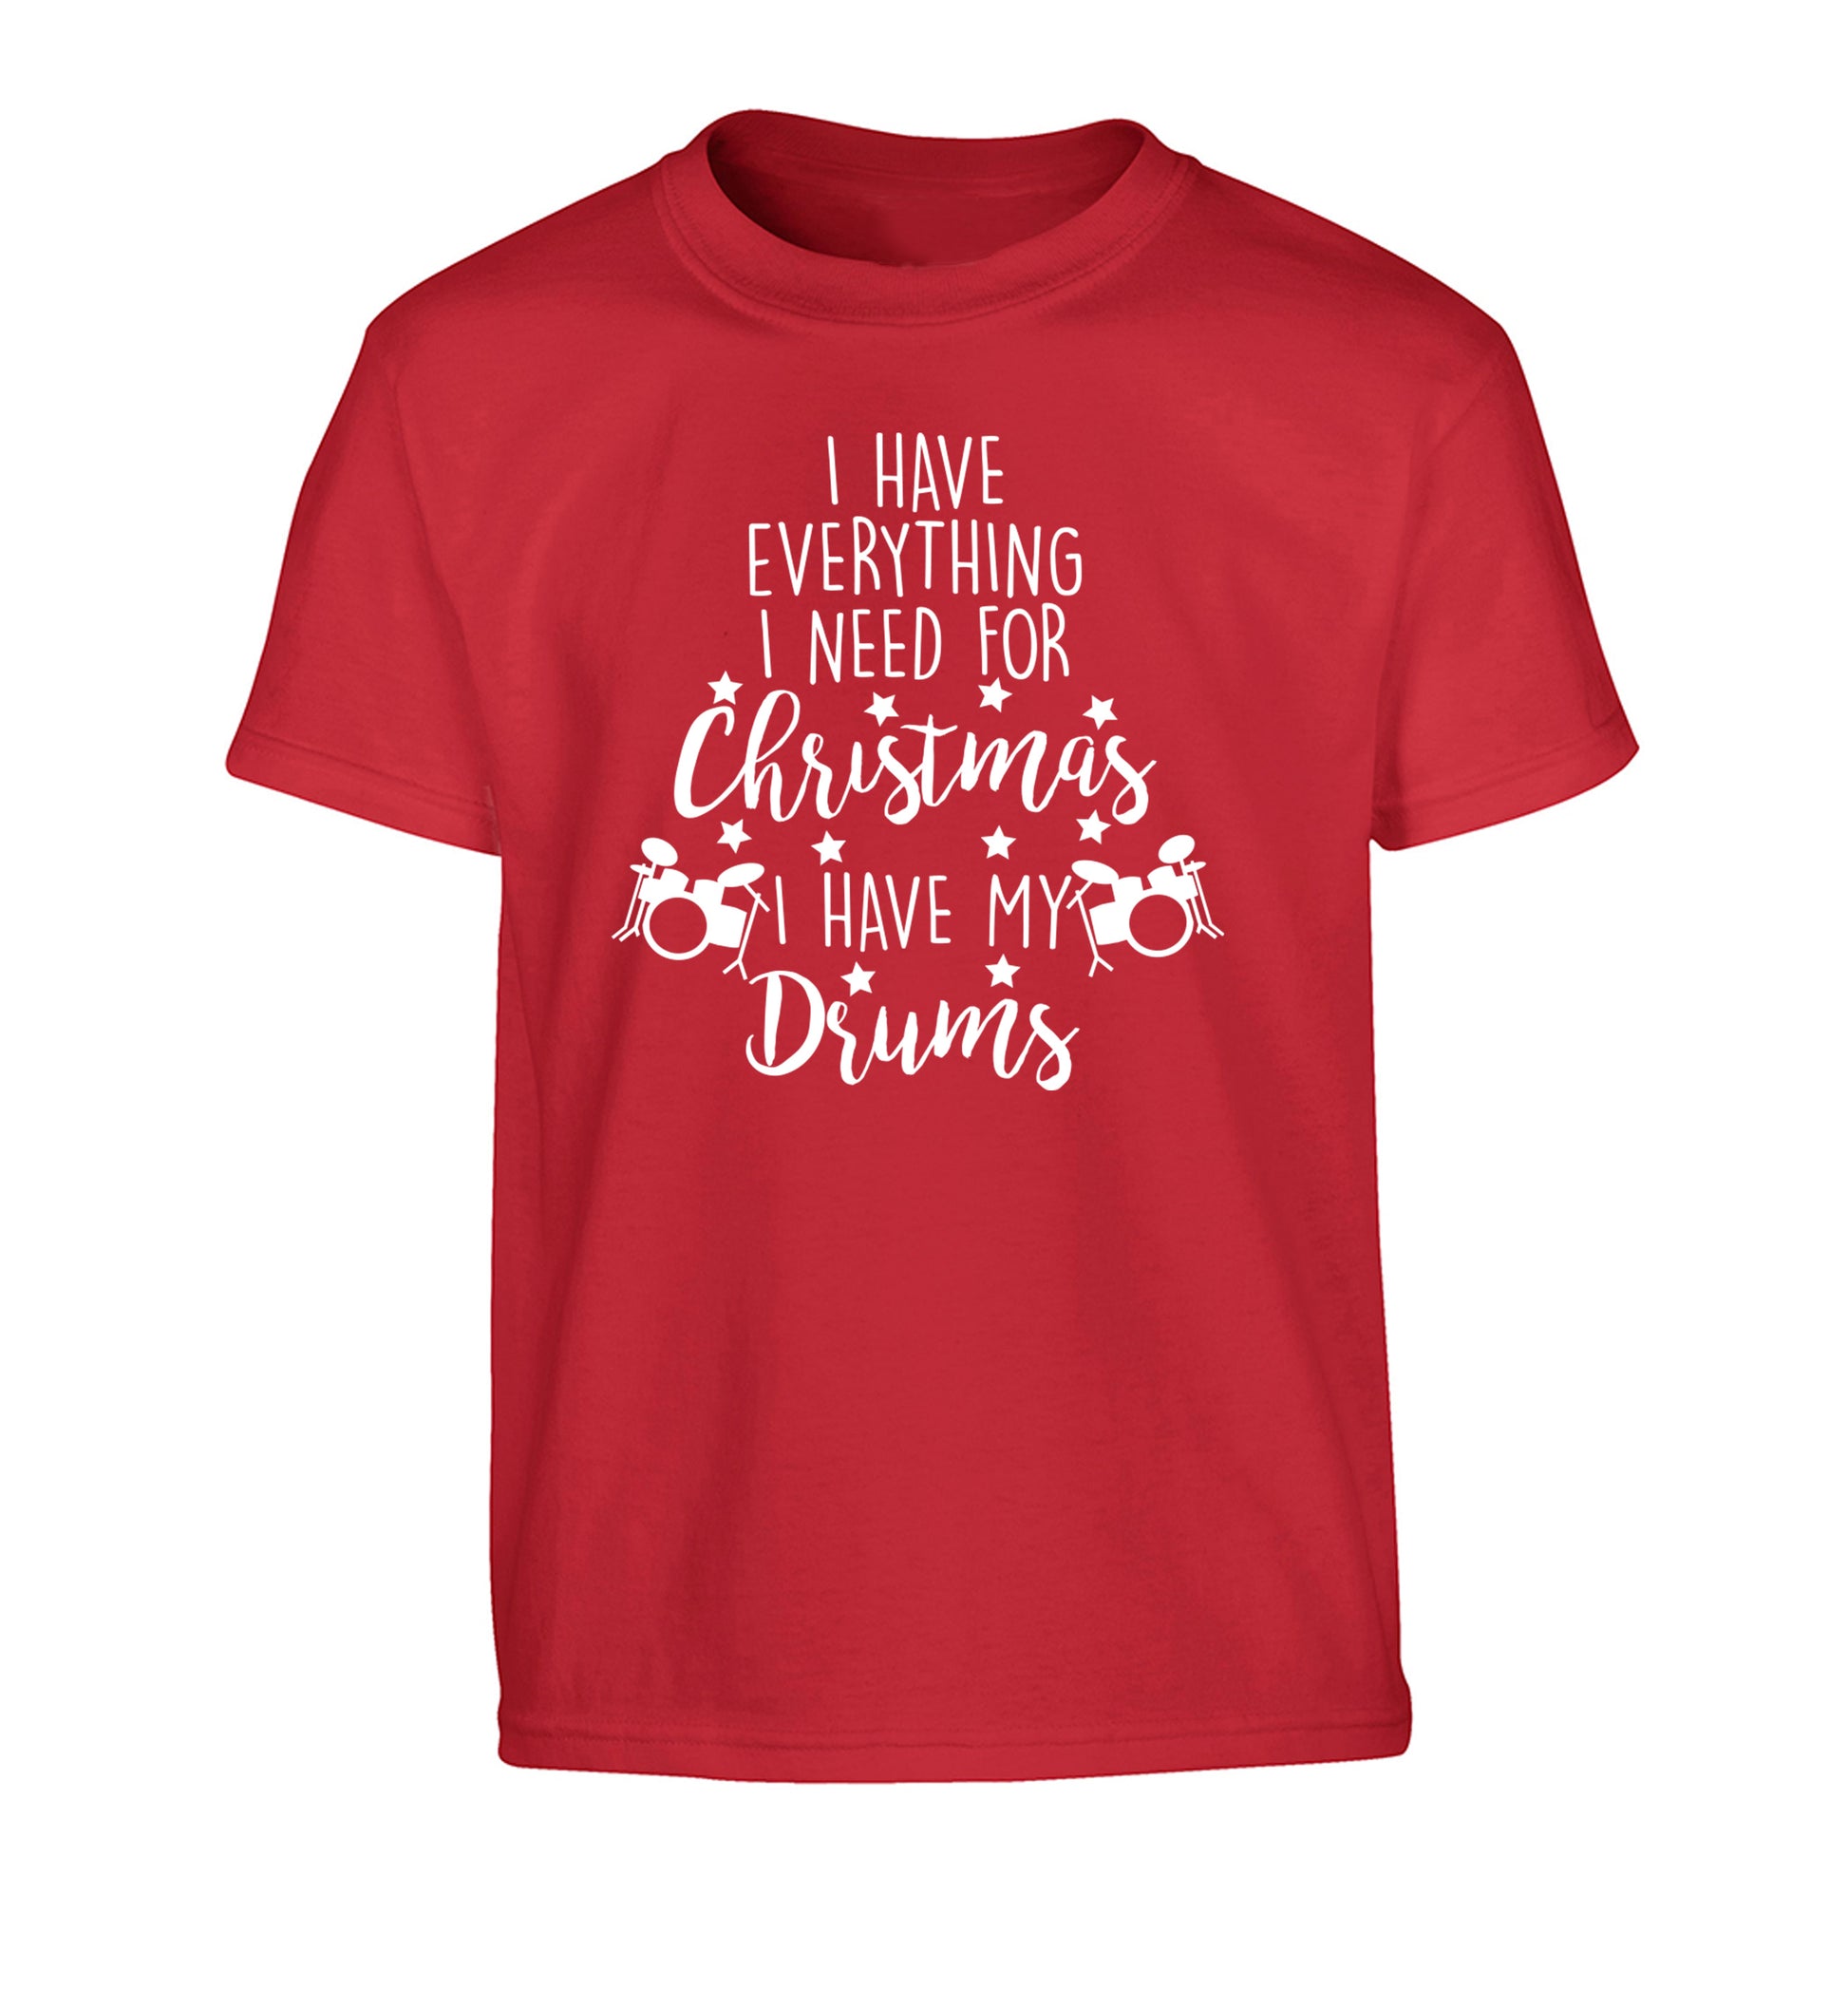 I have everything I need for Christmas I have my drums! Children's red Tshirt 12-14 Years